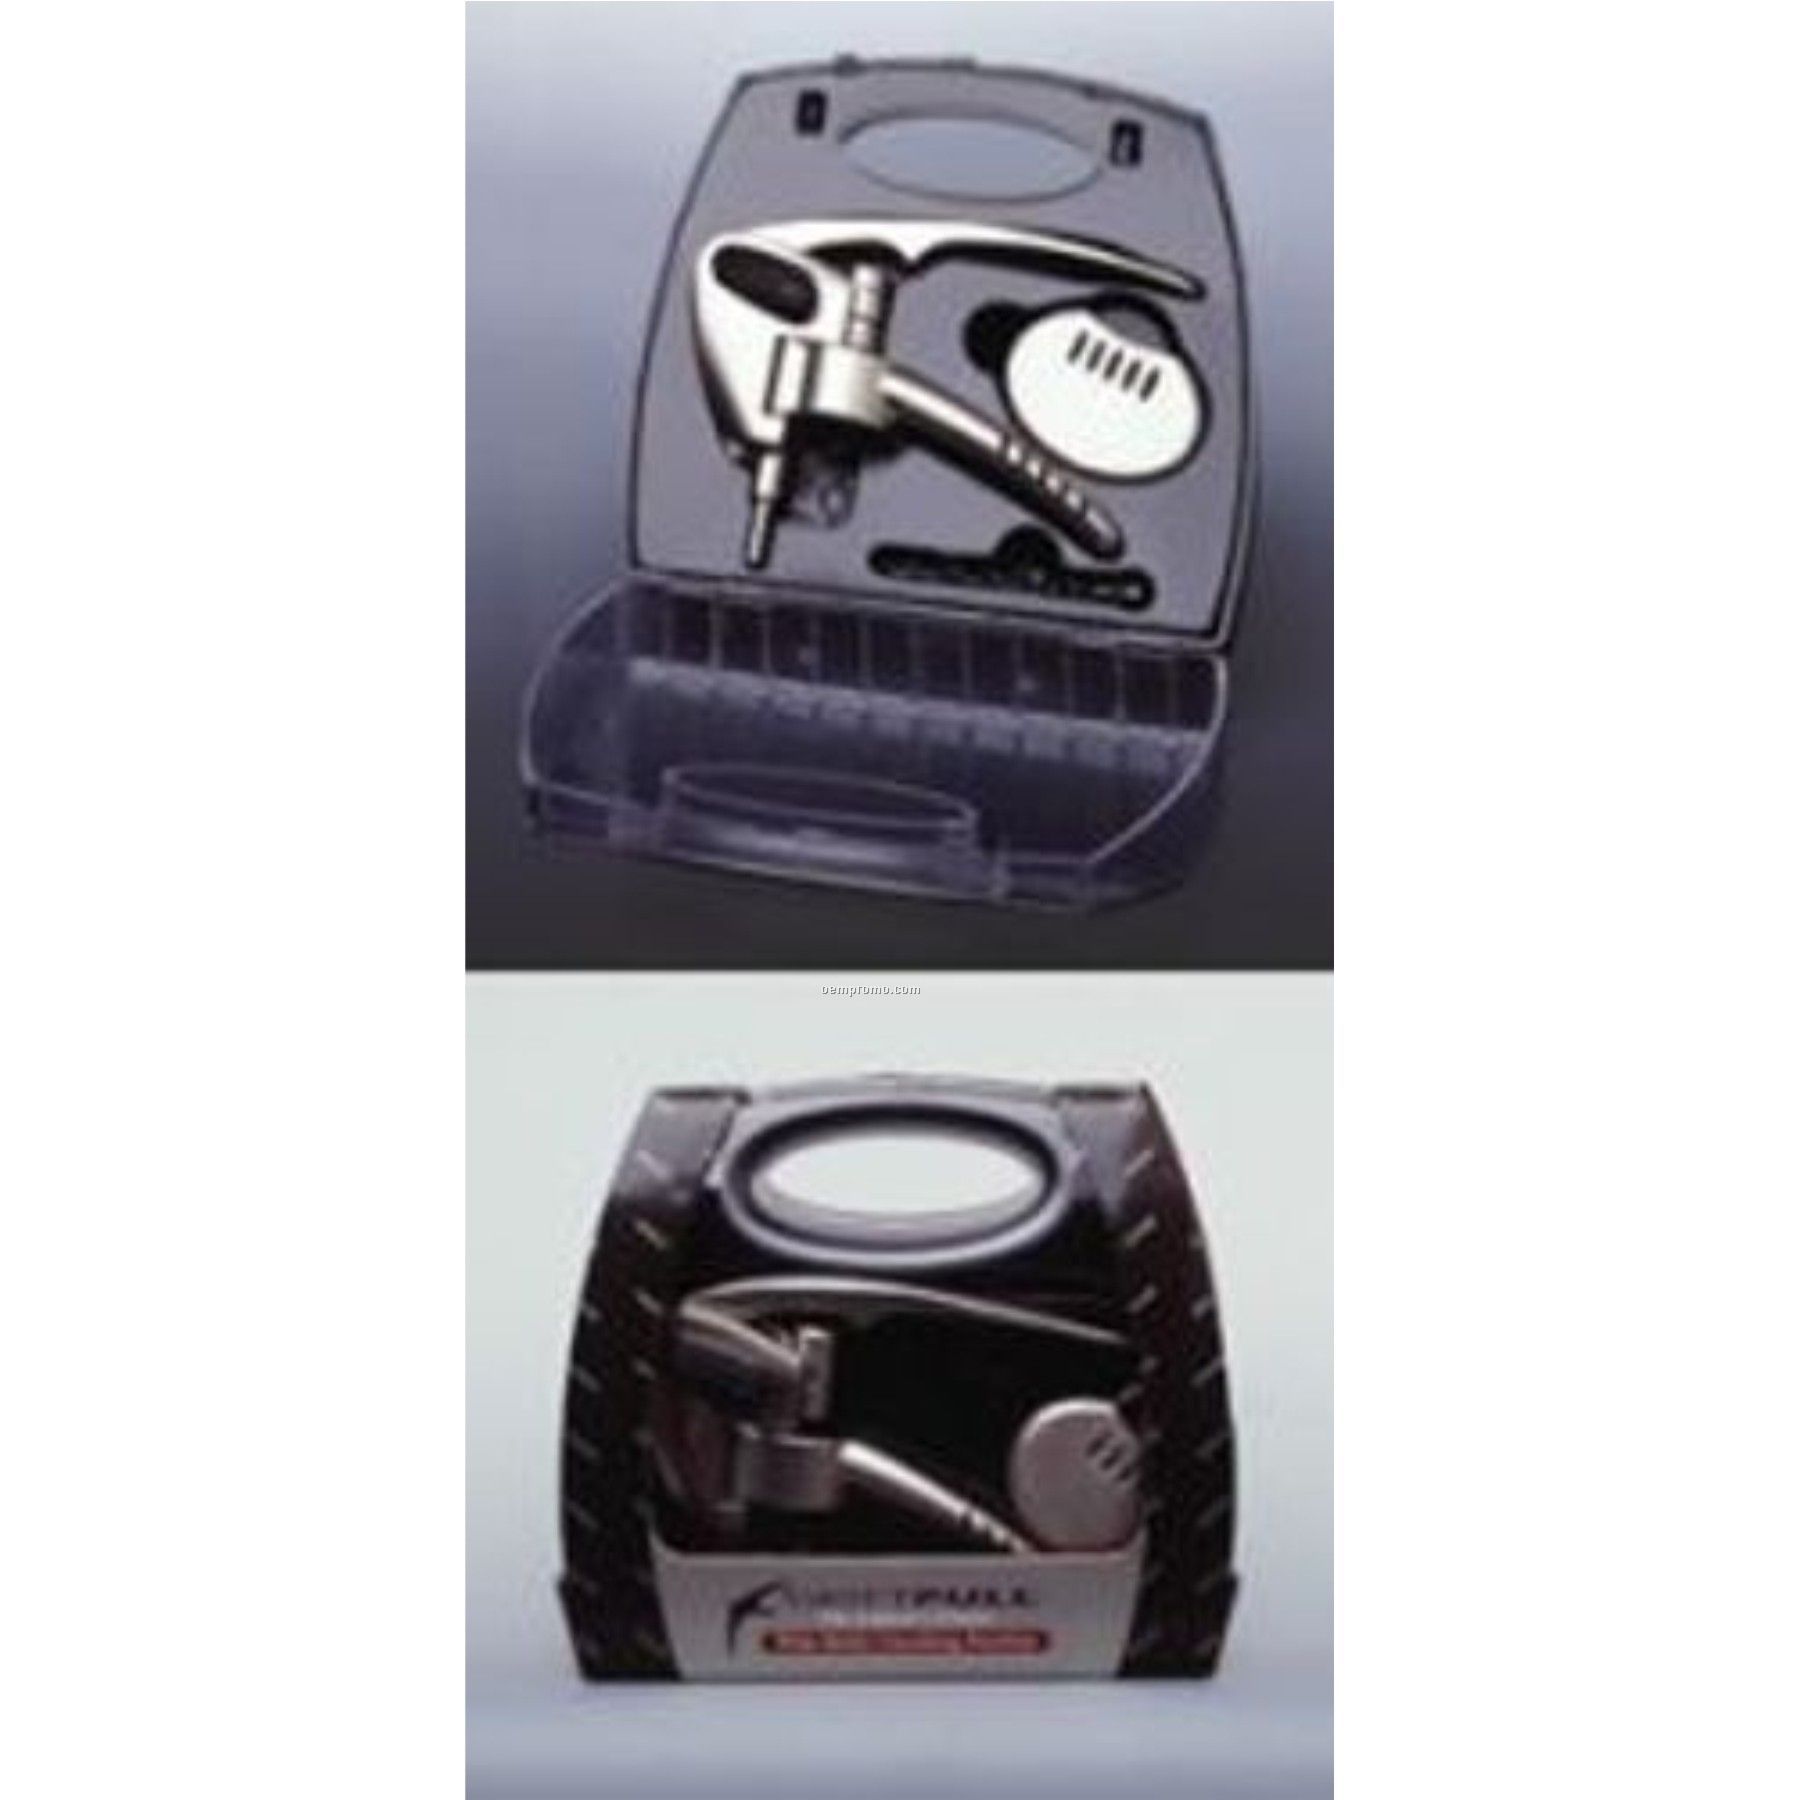 Swiftpull Pro Uncorking Machine In Carrying Case